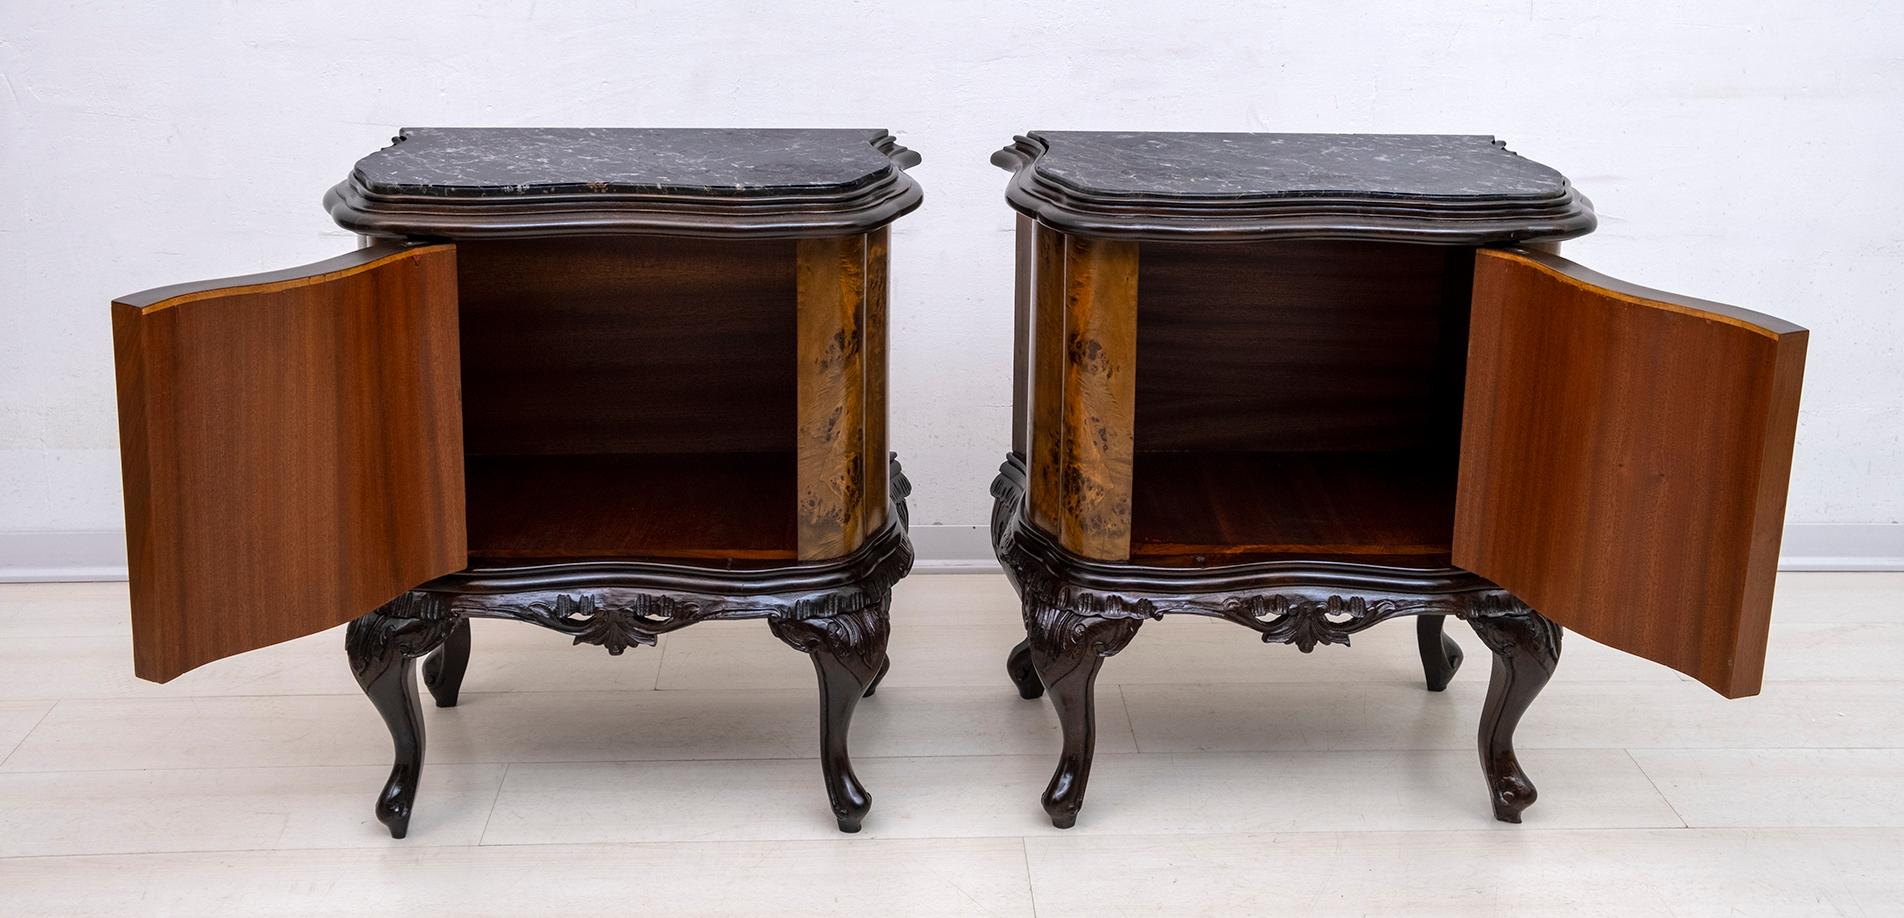 Pair of Art Deco Italian Walnut and Black Marquinia Marble Bedside Tables, 1920s 4